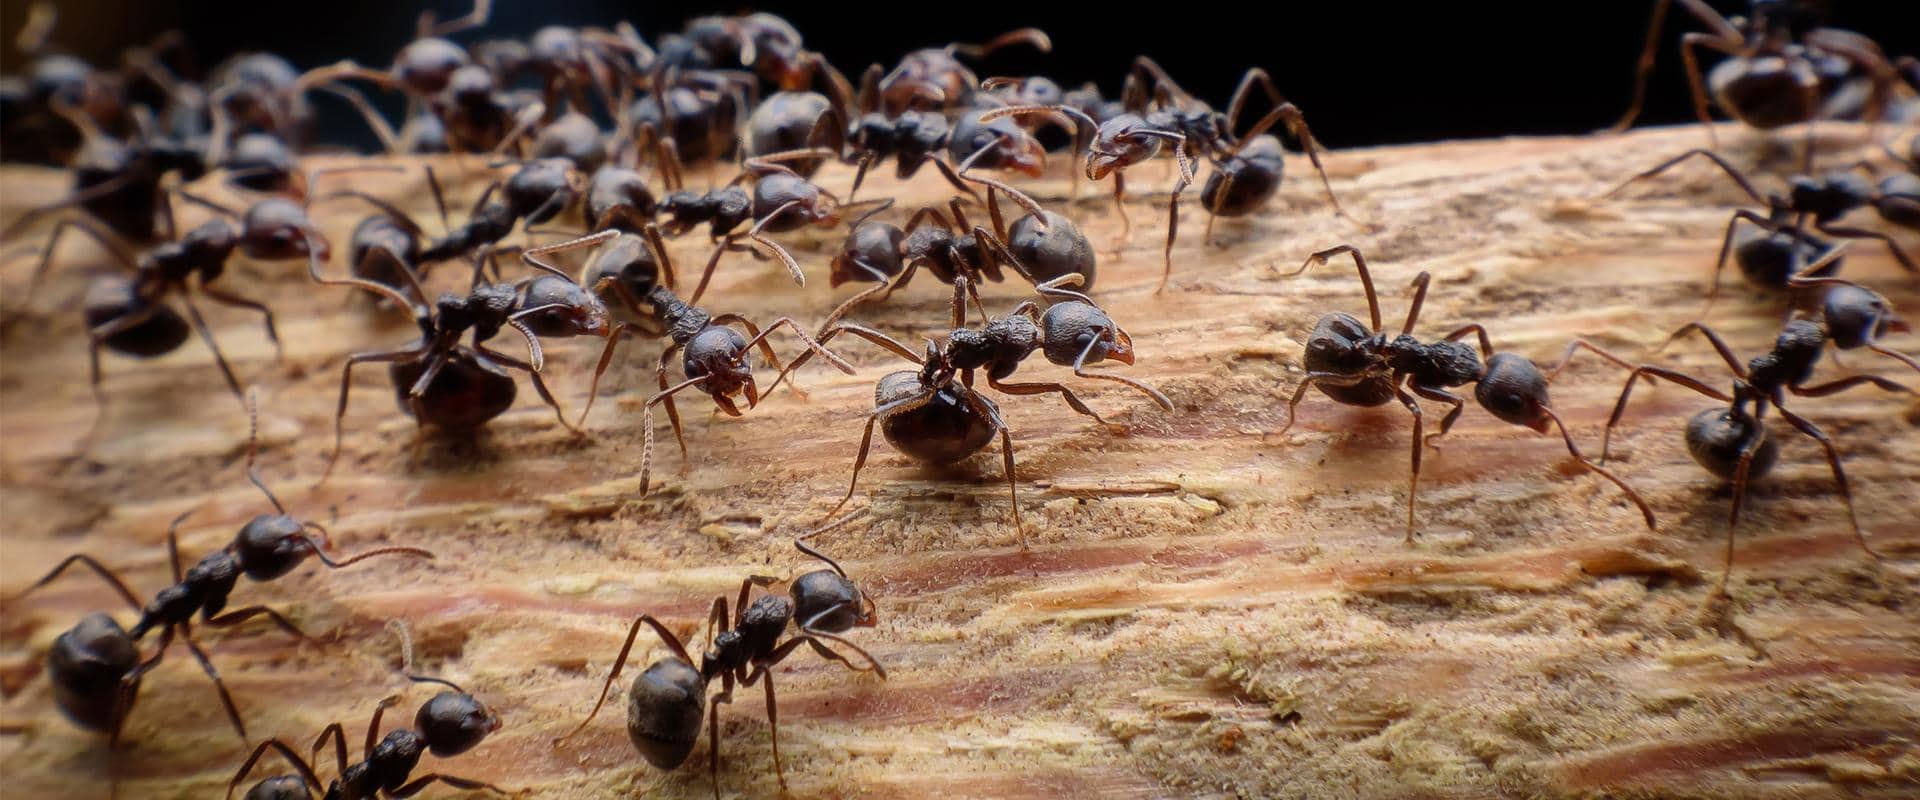 ants on a piece of wood